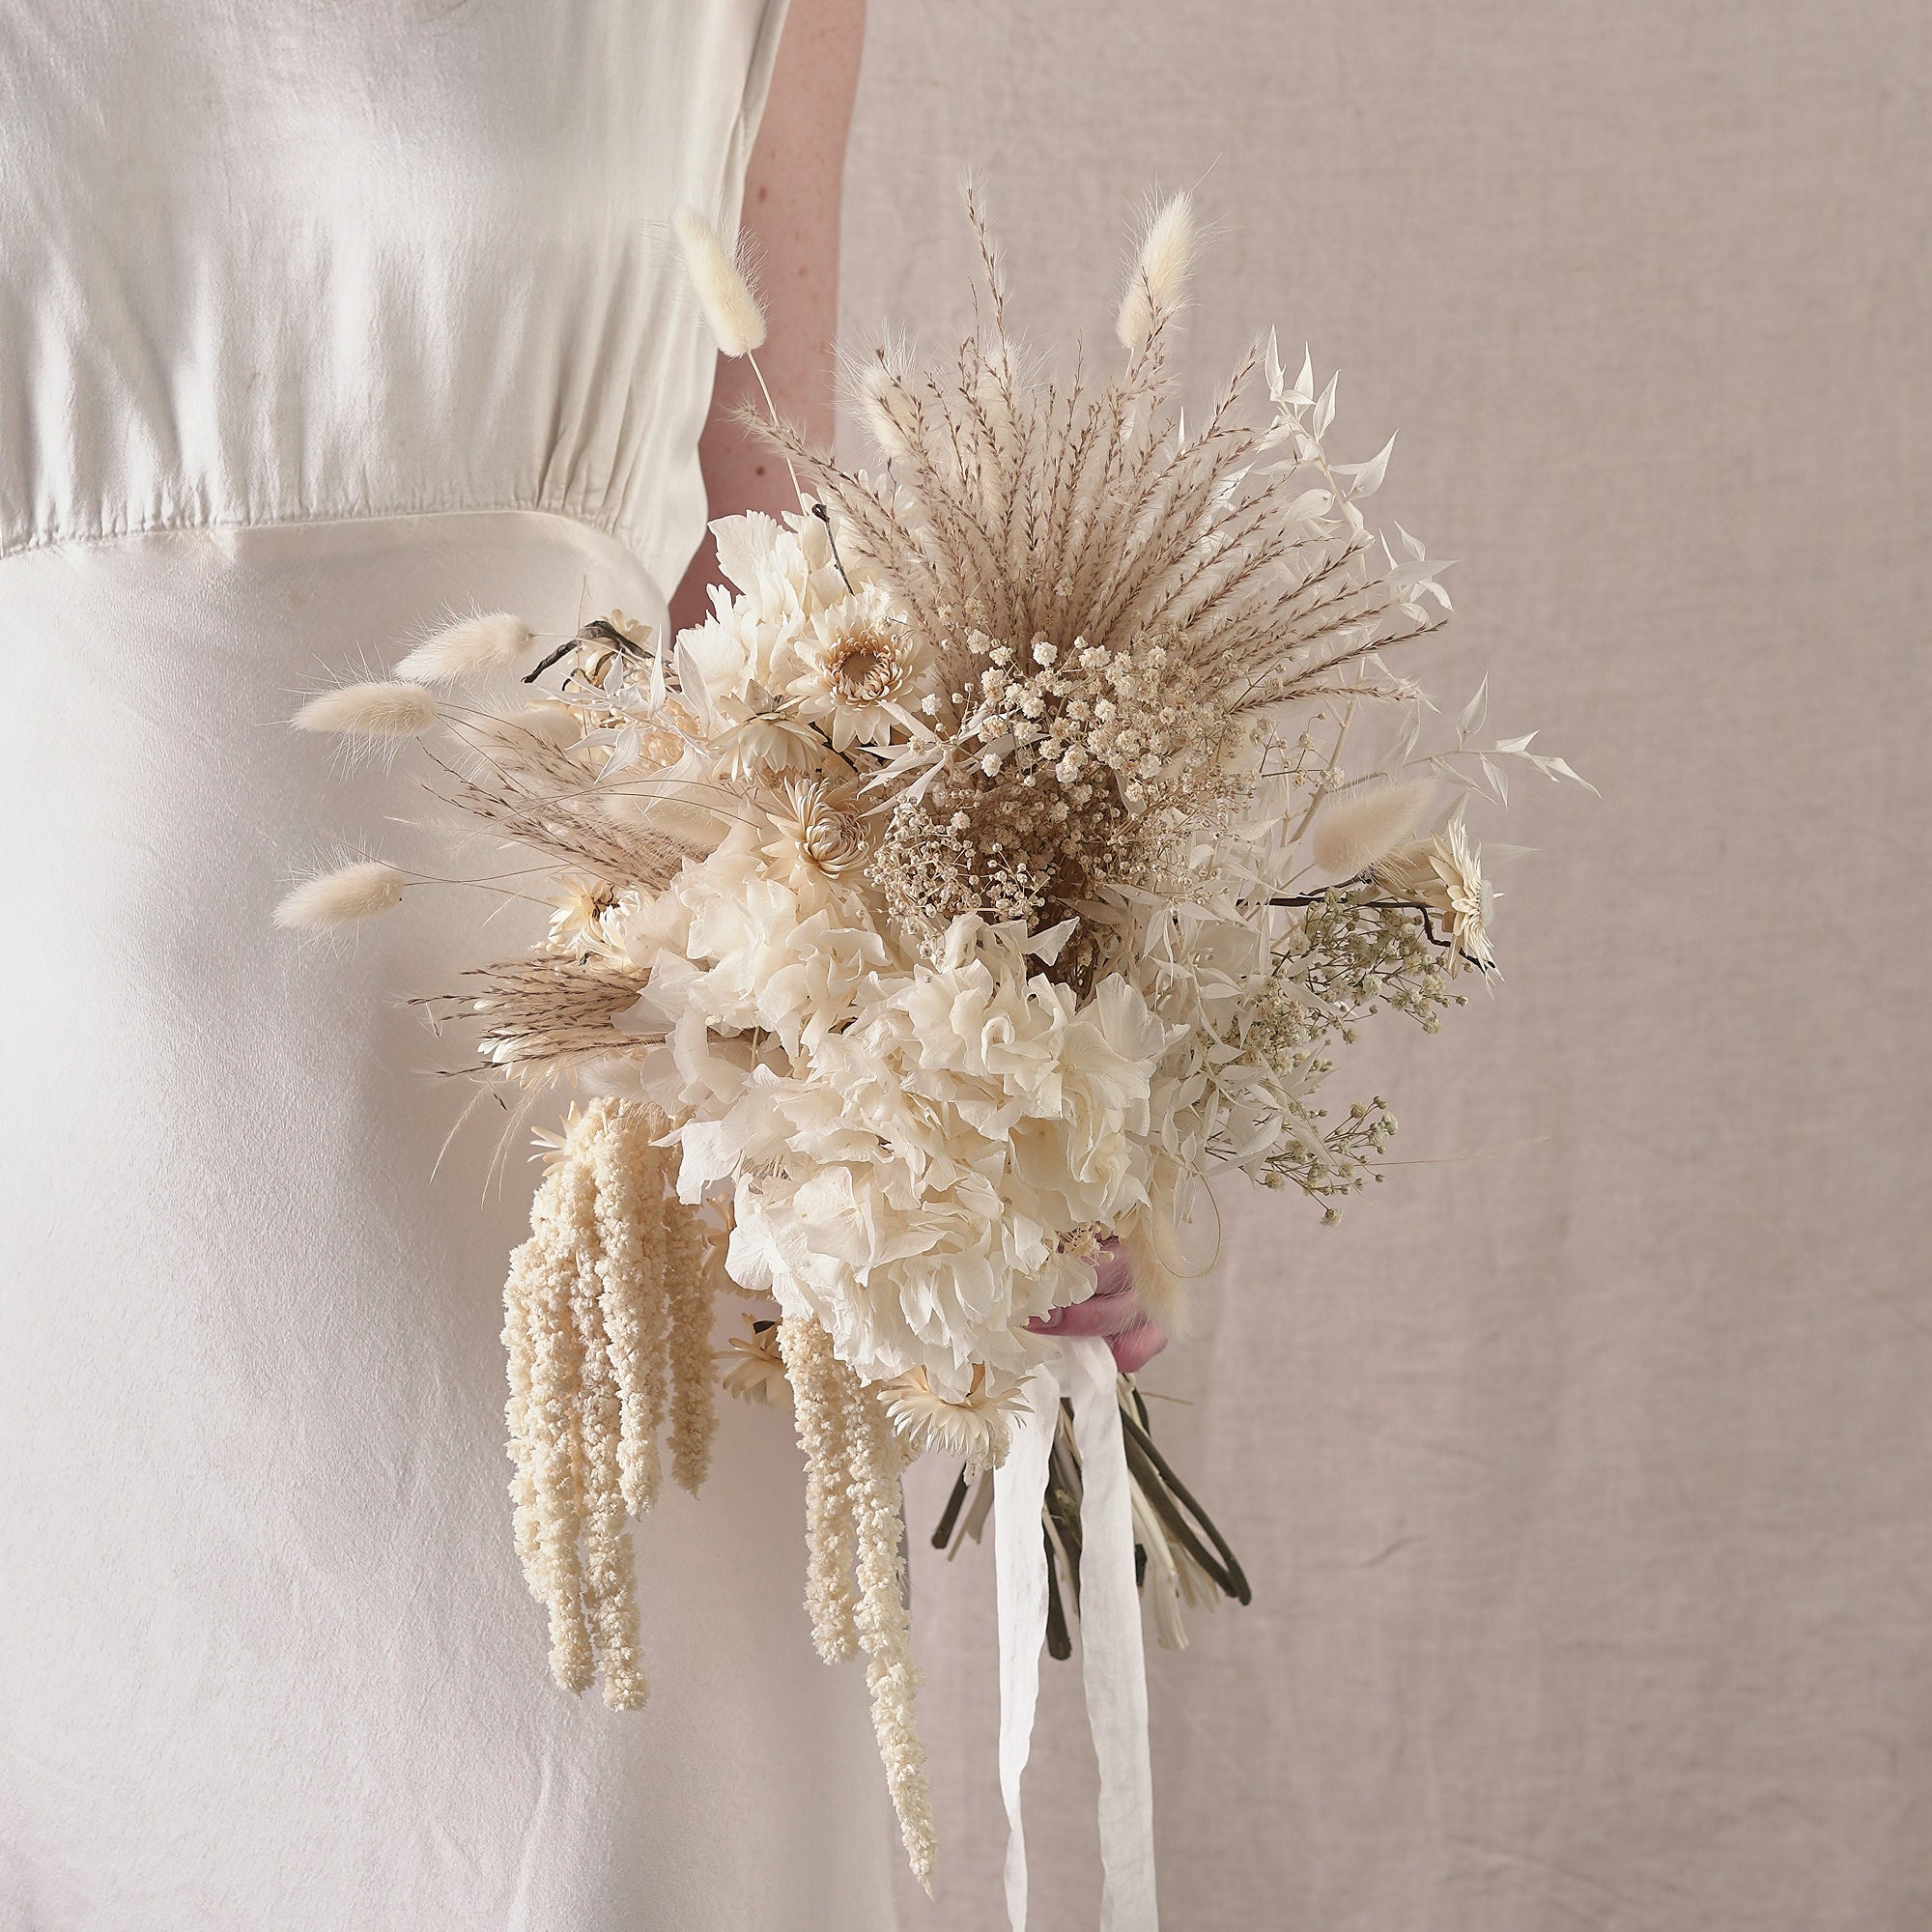 dried bridal bouquet with white, off-white and cream preserved flowers